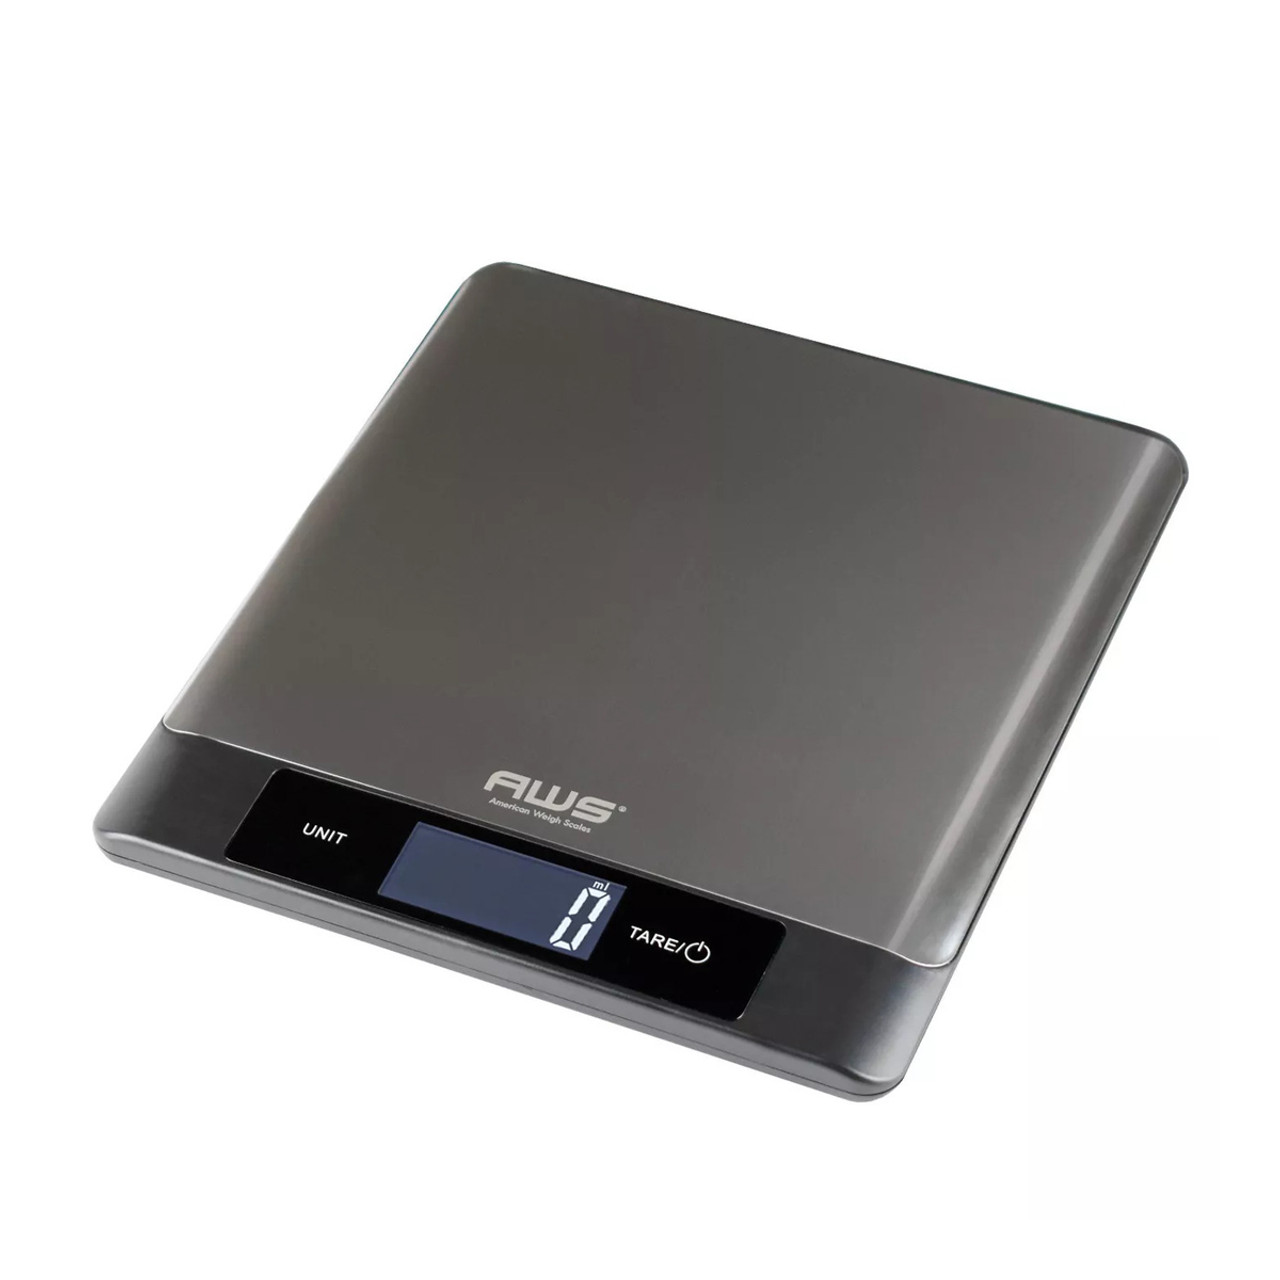 American Weigh AWS Digital Kitchen Scale (Black) with Stainless Steel Bowl